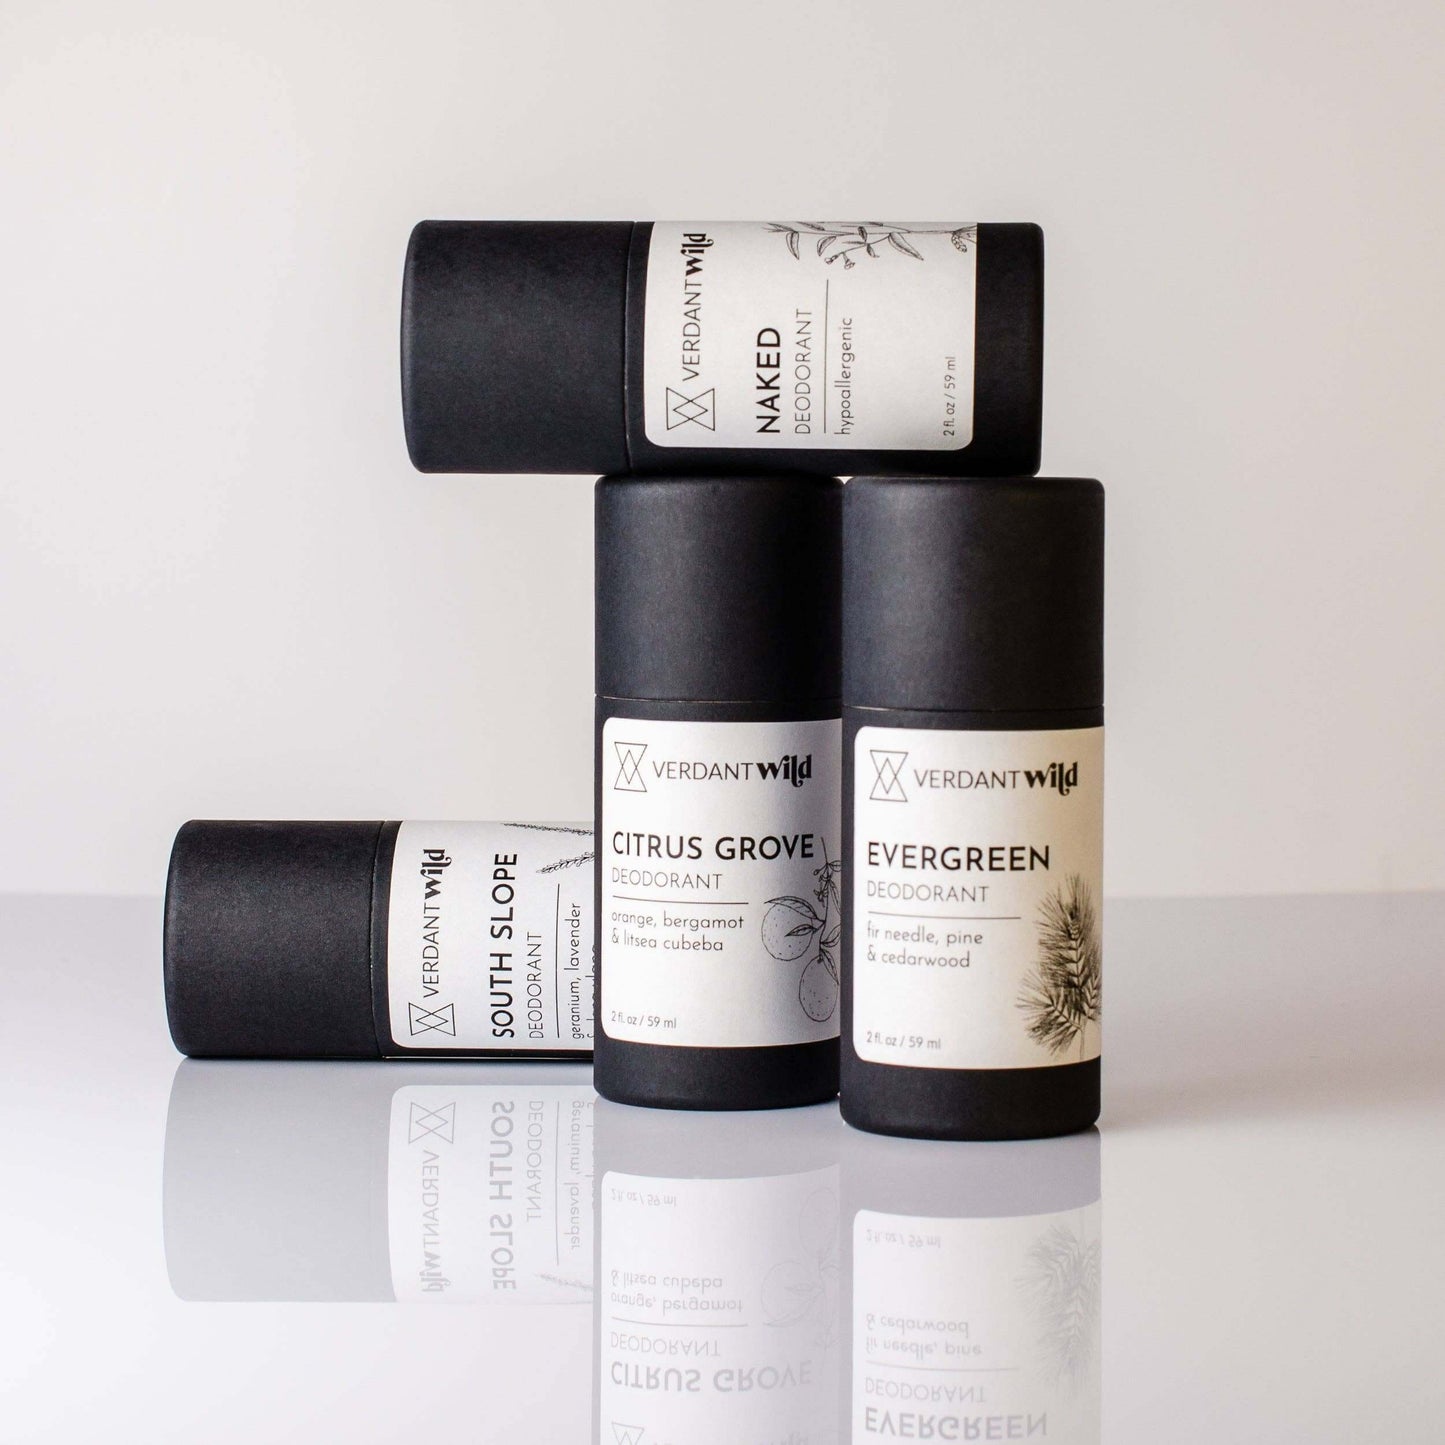 Four non toxic deodorants in black biodegradable tubes with white labels.